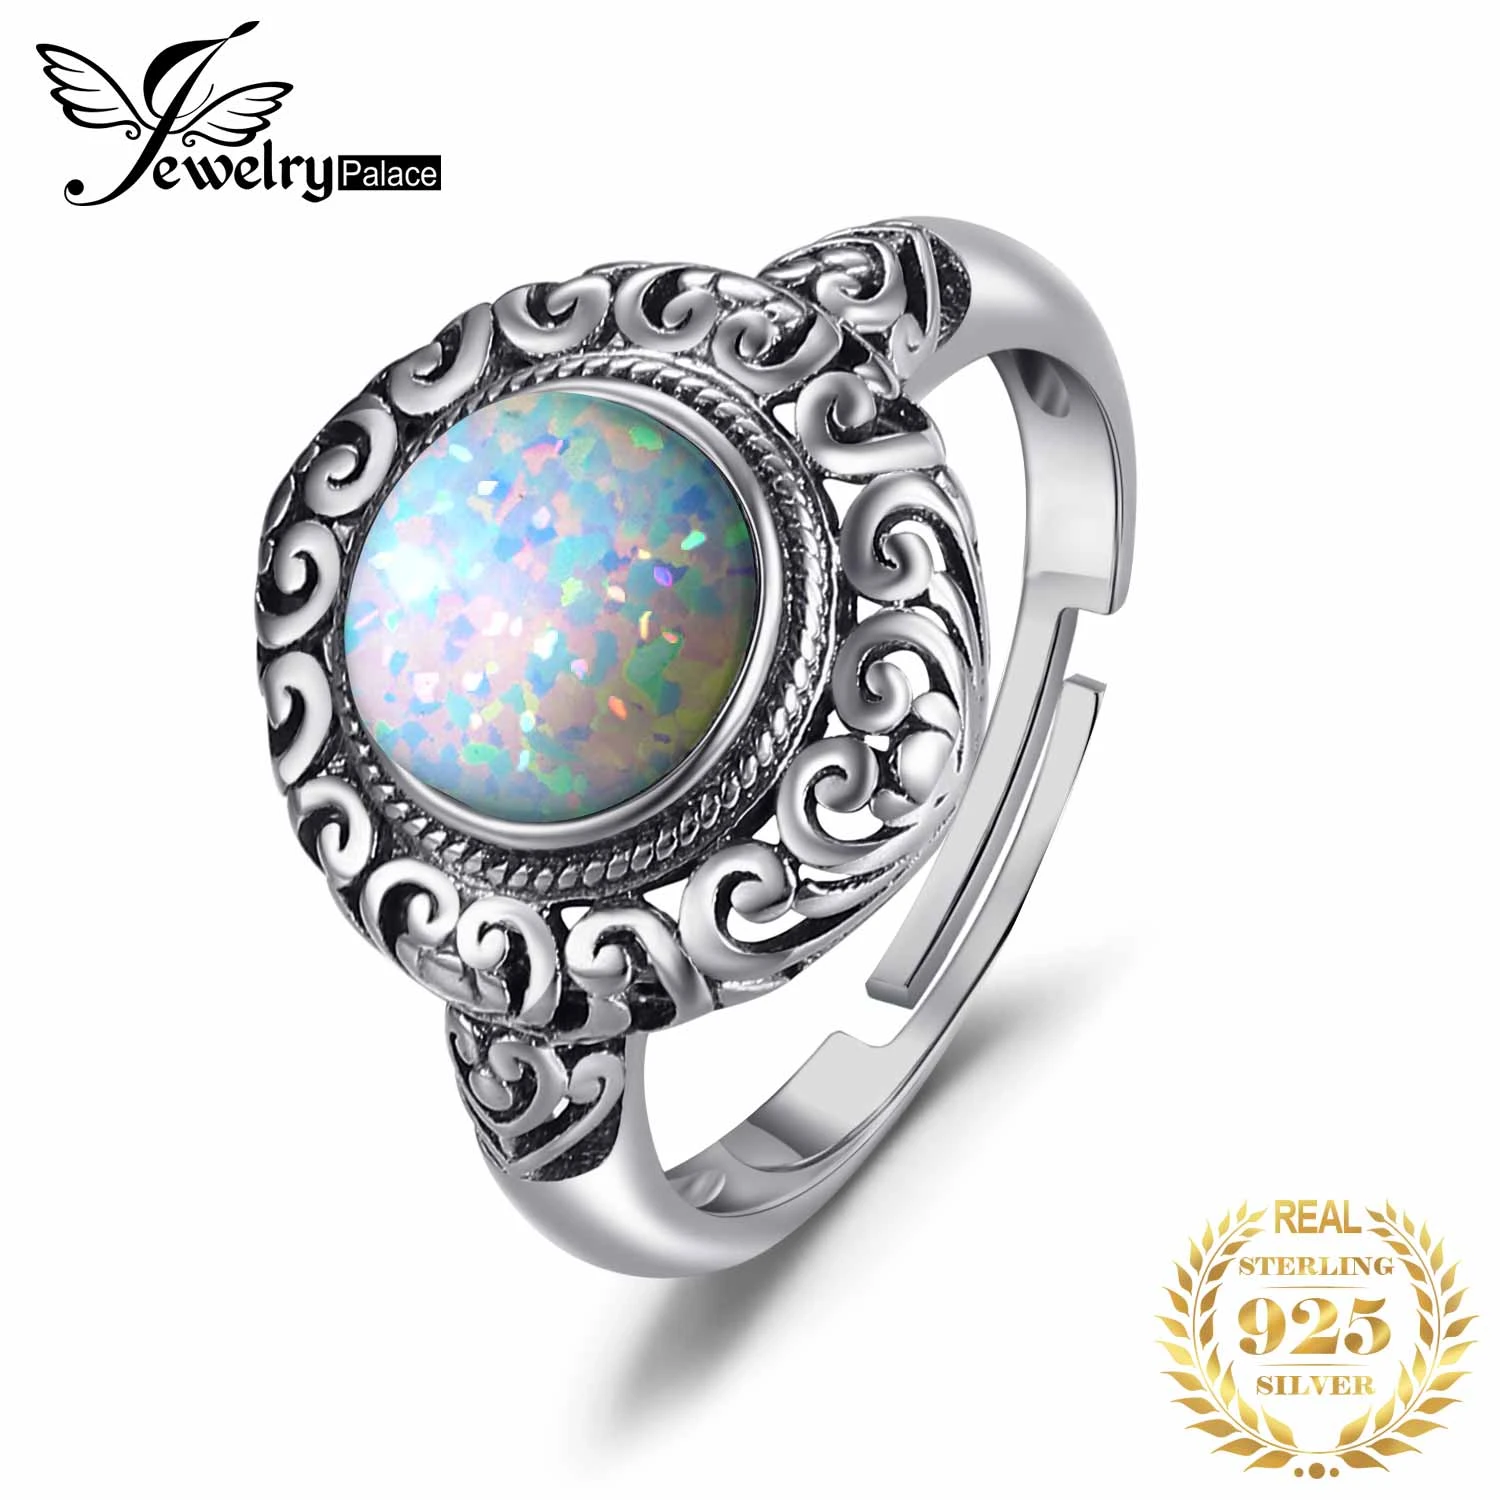 JewelryPalace Vintage 1.5ct Huge Created Opal Ring Unique Open Adjustable Cocktail  925 Sterling Silver Rings for Women Jewelry